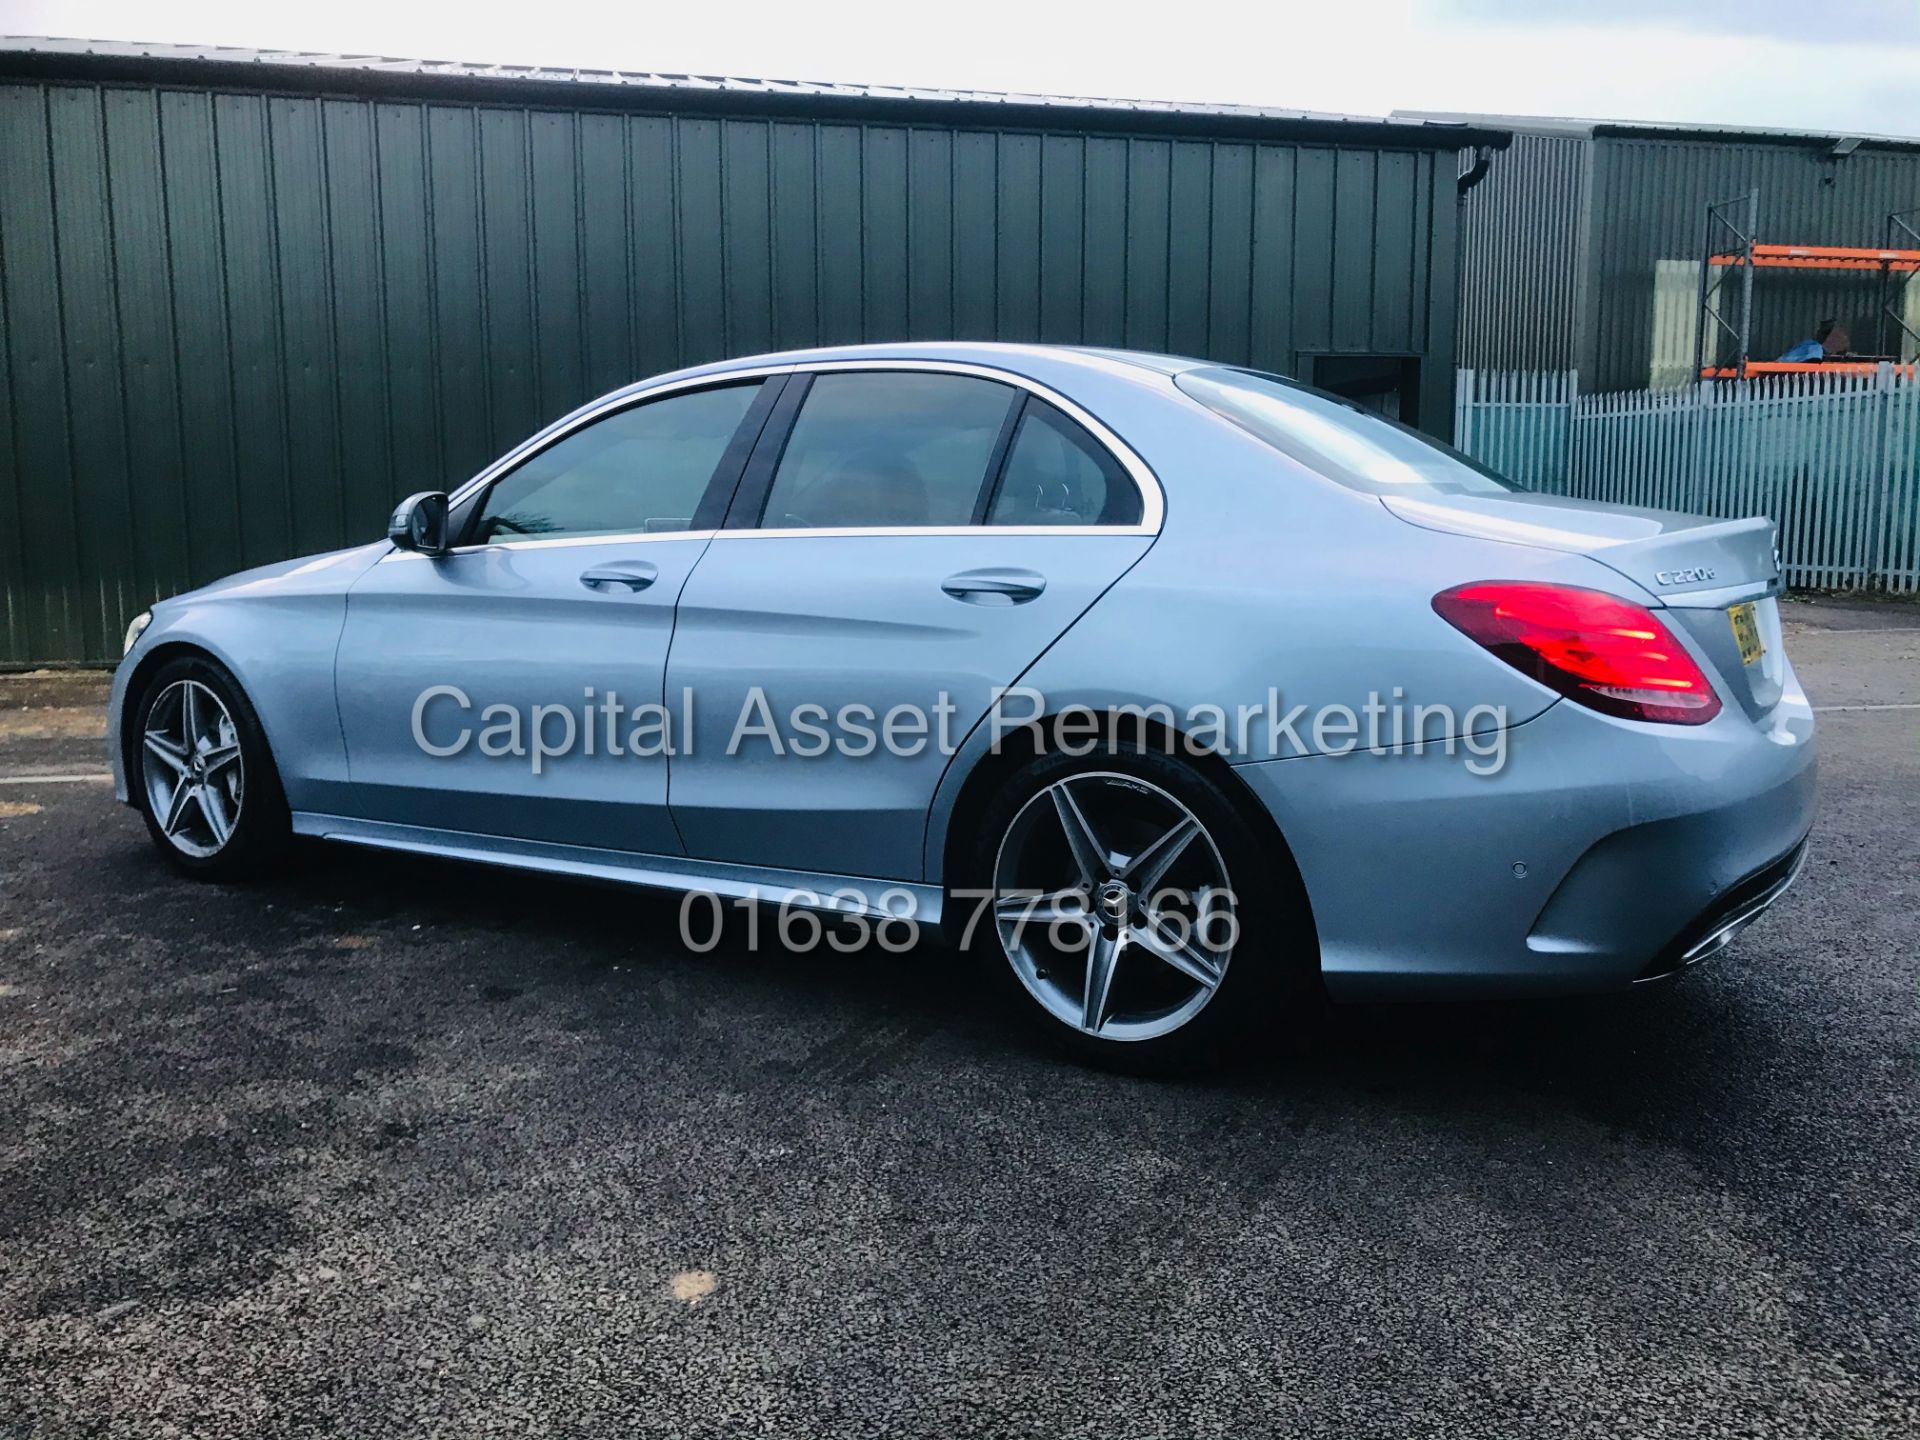 (ON SALE) MERCEDES C220d "AMG LINE" AUTOMATIC (18 REG) 1 OWNER - LEATHER - NAV - REAR CAMERA - Image 9 of 22